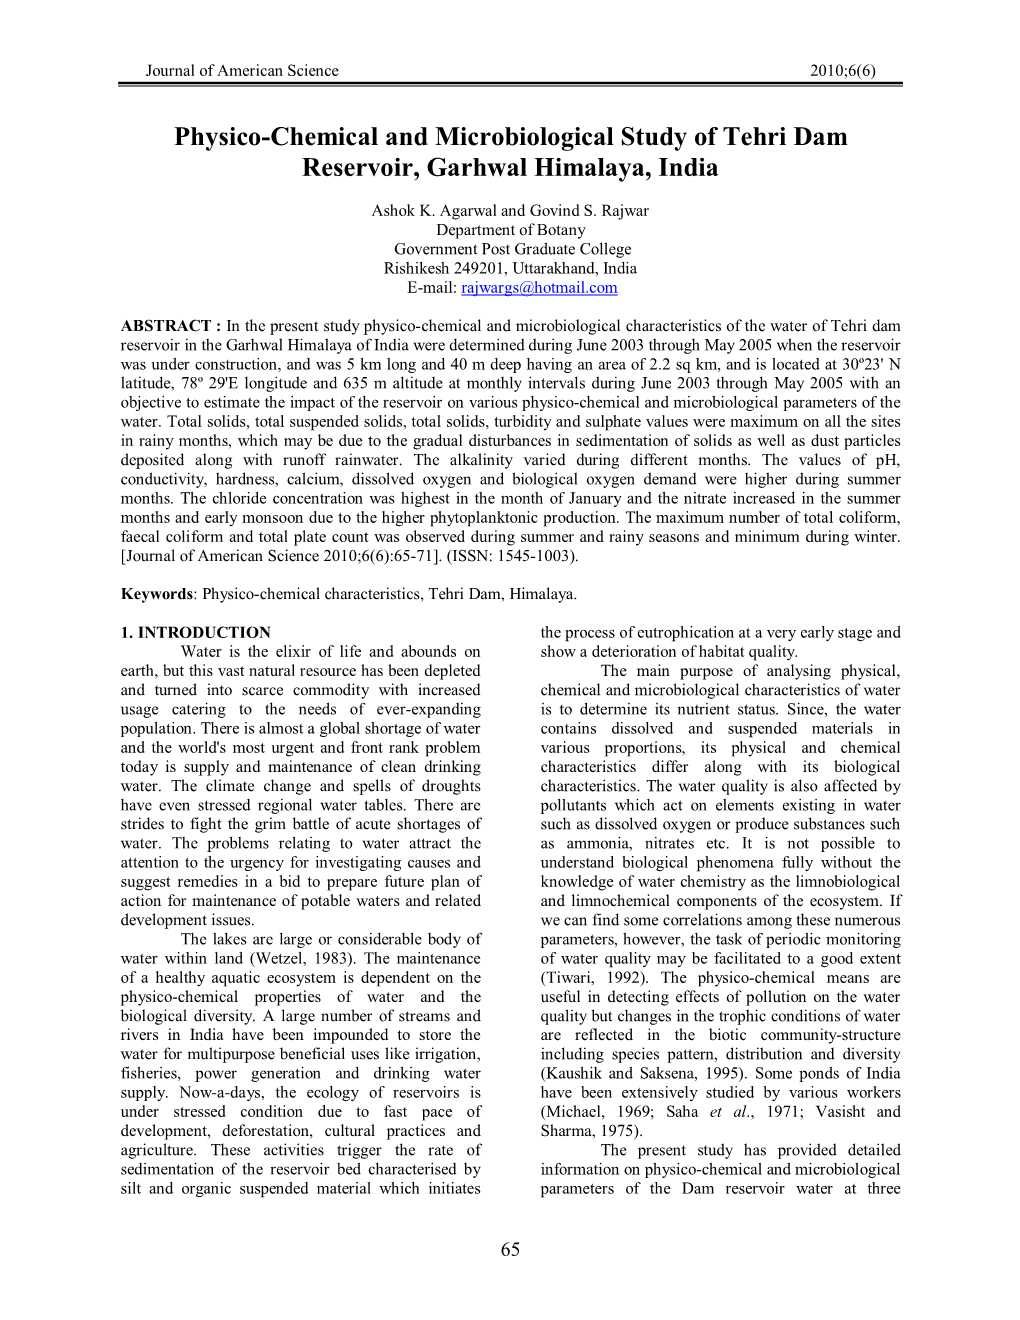 Physico-Chemical and Microbiological Study of Tehri Dam Reservoir, Garhwal Himalaya, India